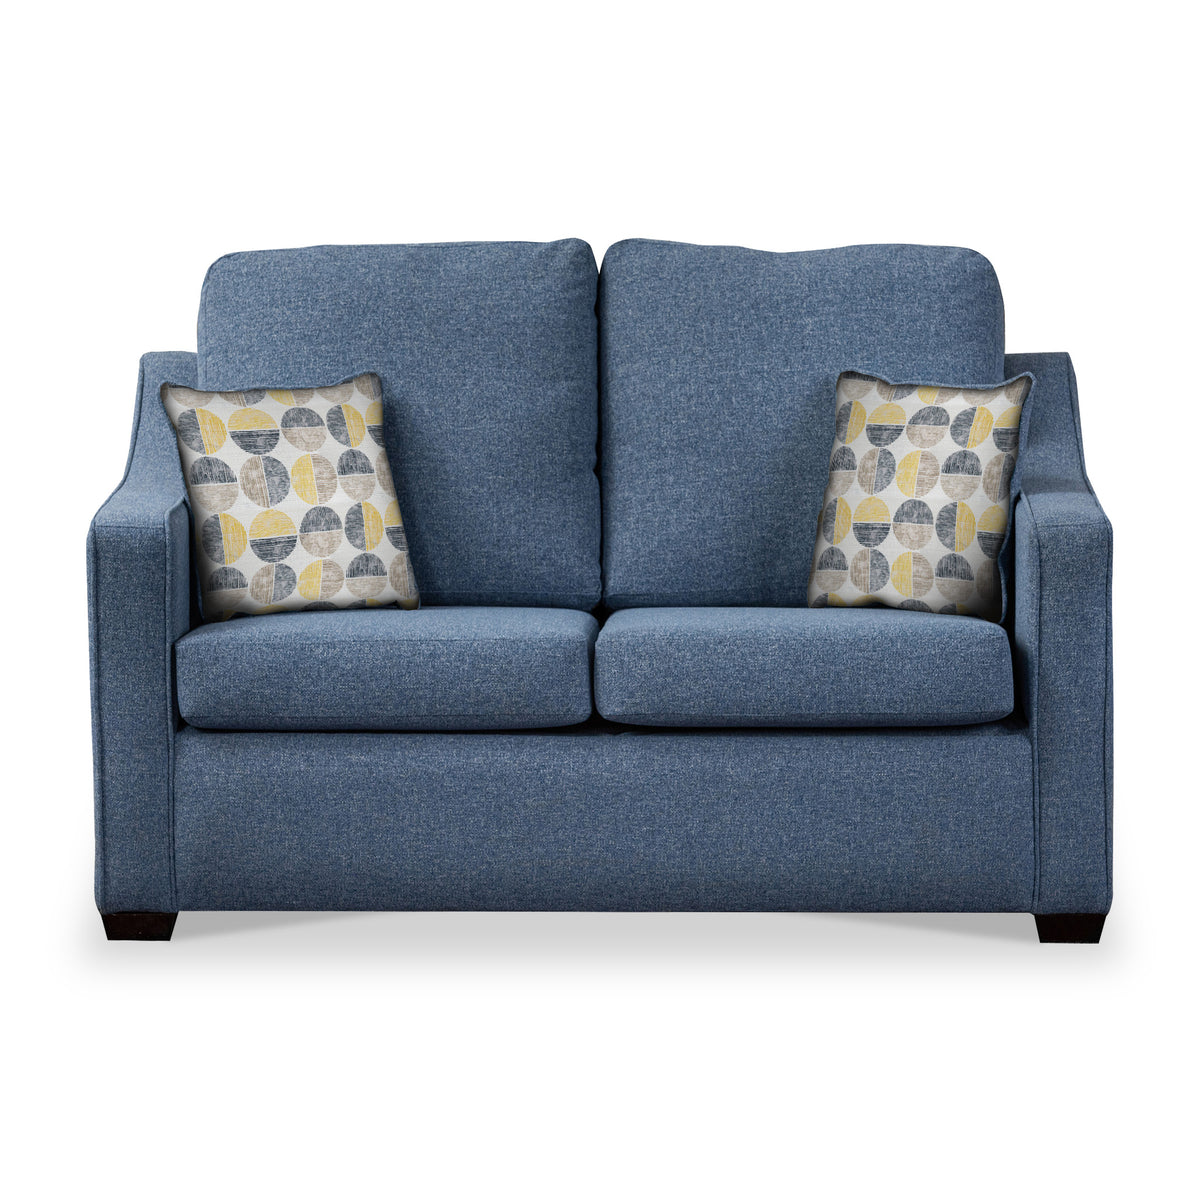 Charlcote Denim Faux Linen 2 Seater Sofabed with Beige Scatter Cushions from Roseland Furniture